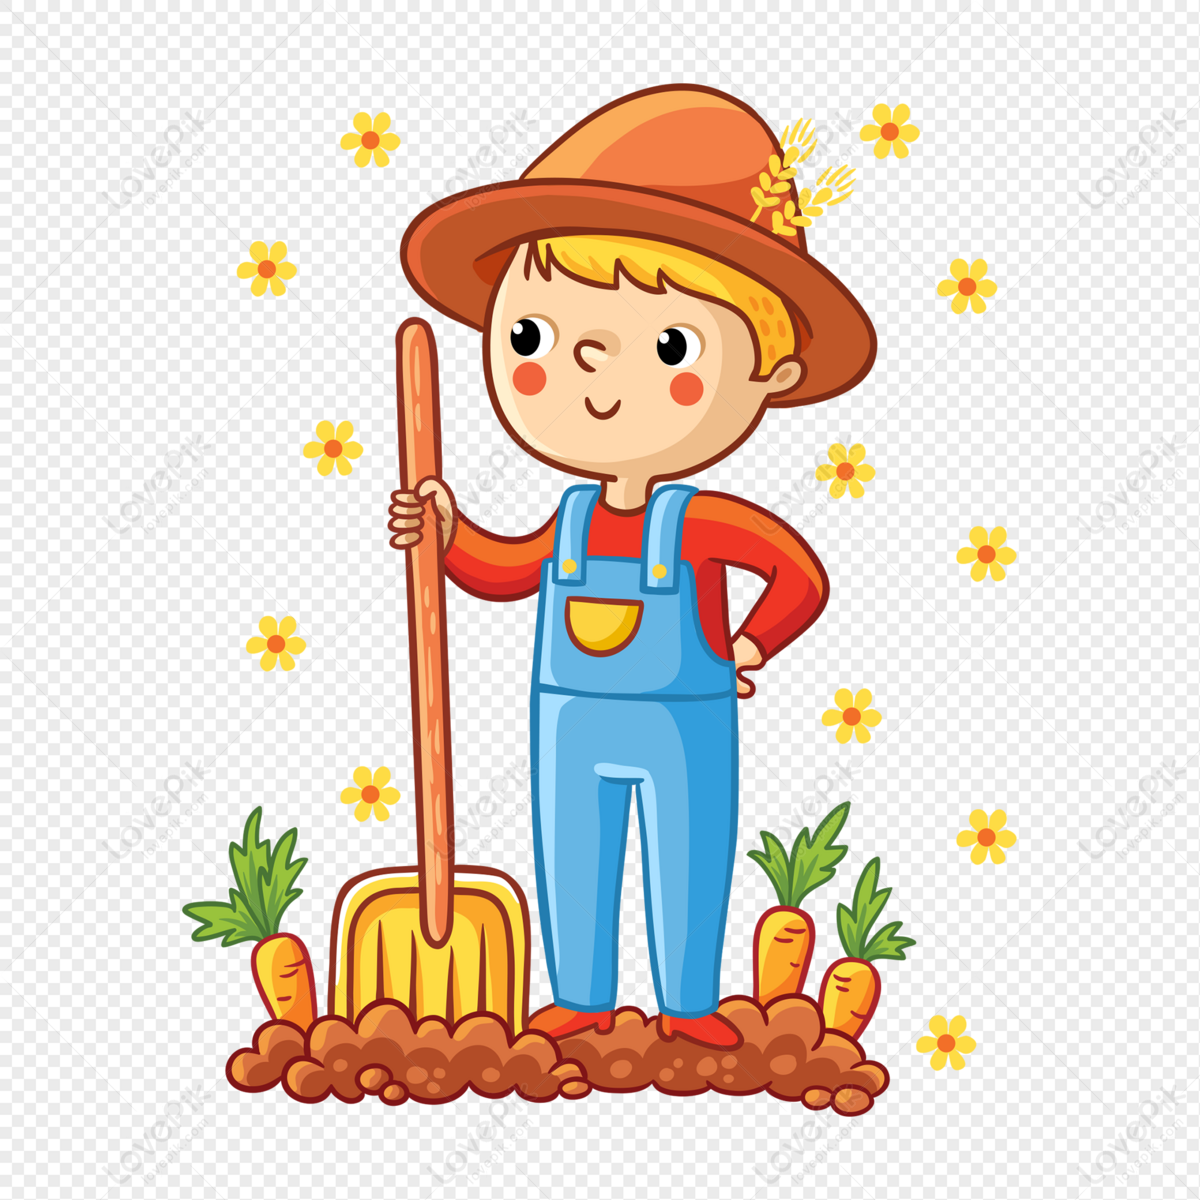 Cartoon Farmer Farming Picture PNG Transparent Background And Clipart Image  For Free Download - Lovepik | 401543030